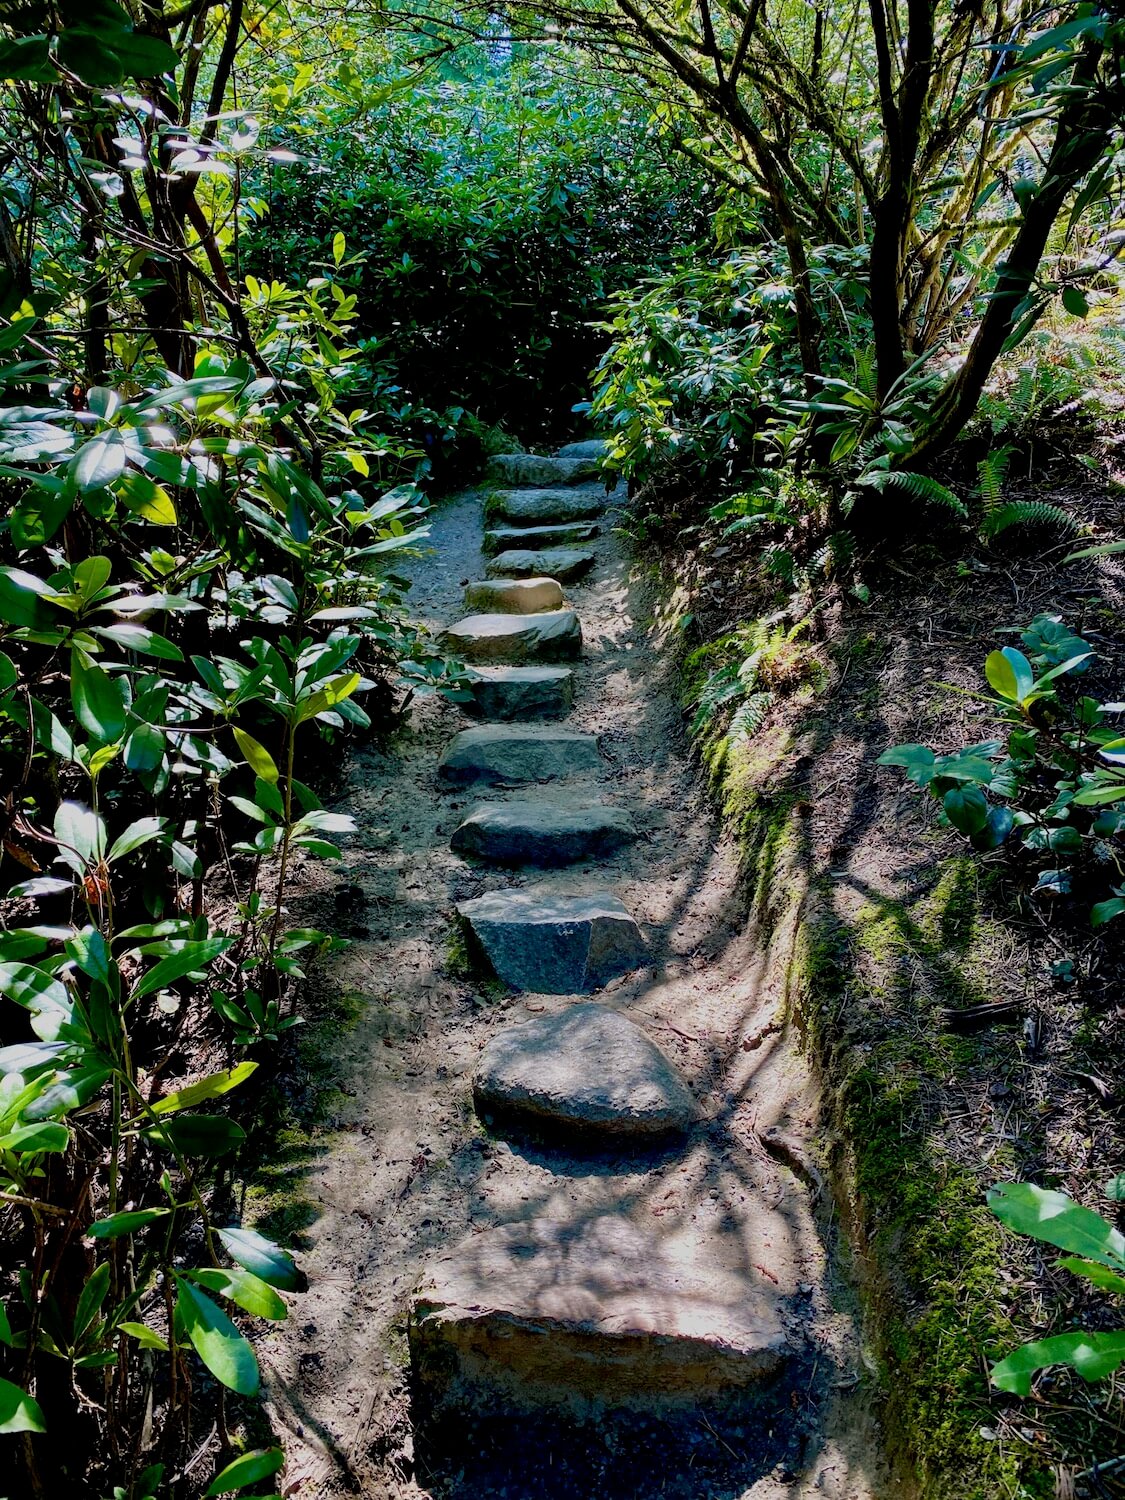 Granite stepping stones lead up a narrow garden path well within the confines of a thicket of shrubbery. This leads to a waterfall inside Kubota Gardens in Seattle.